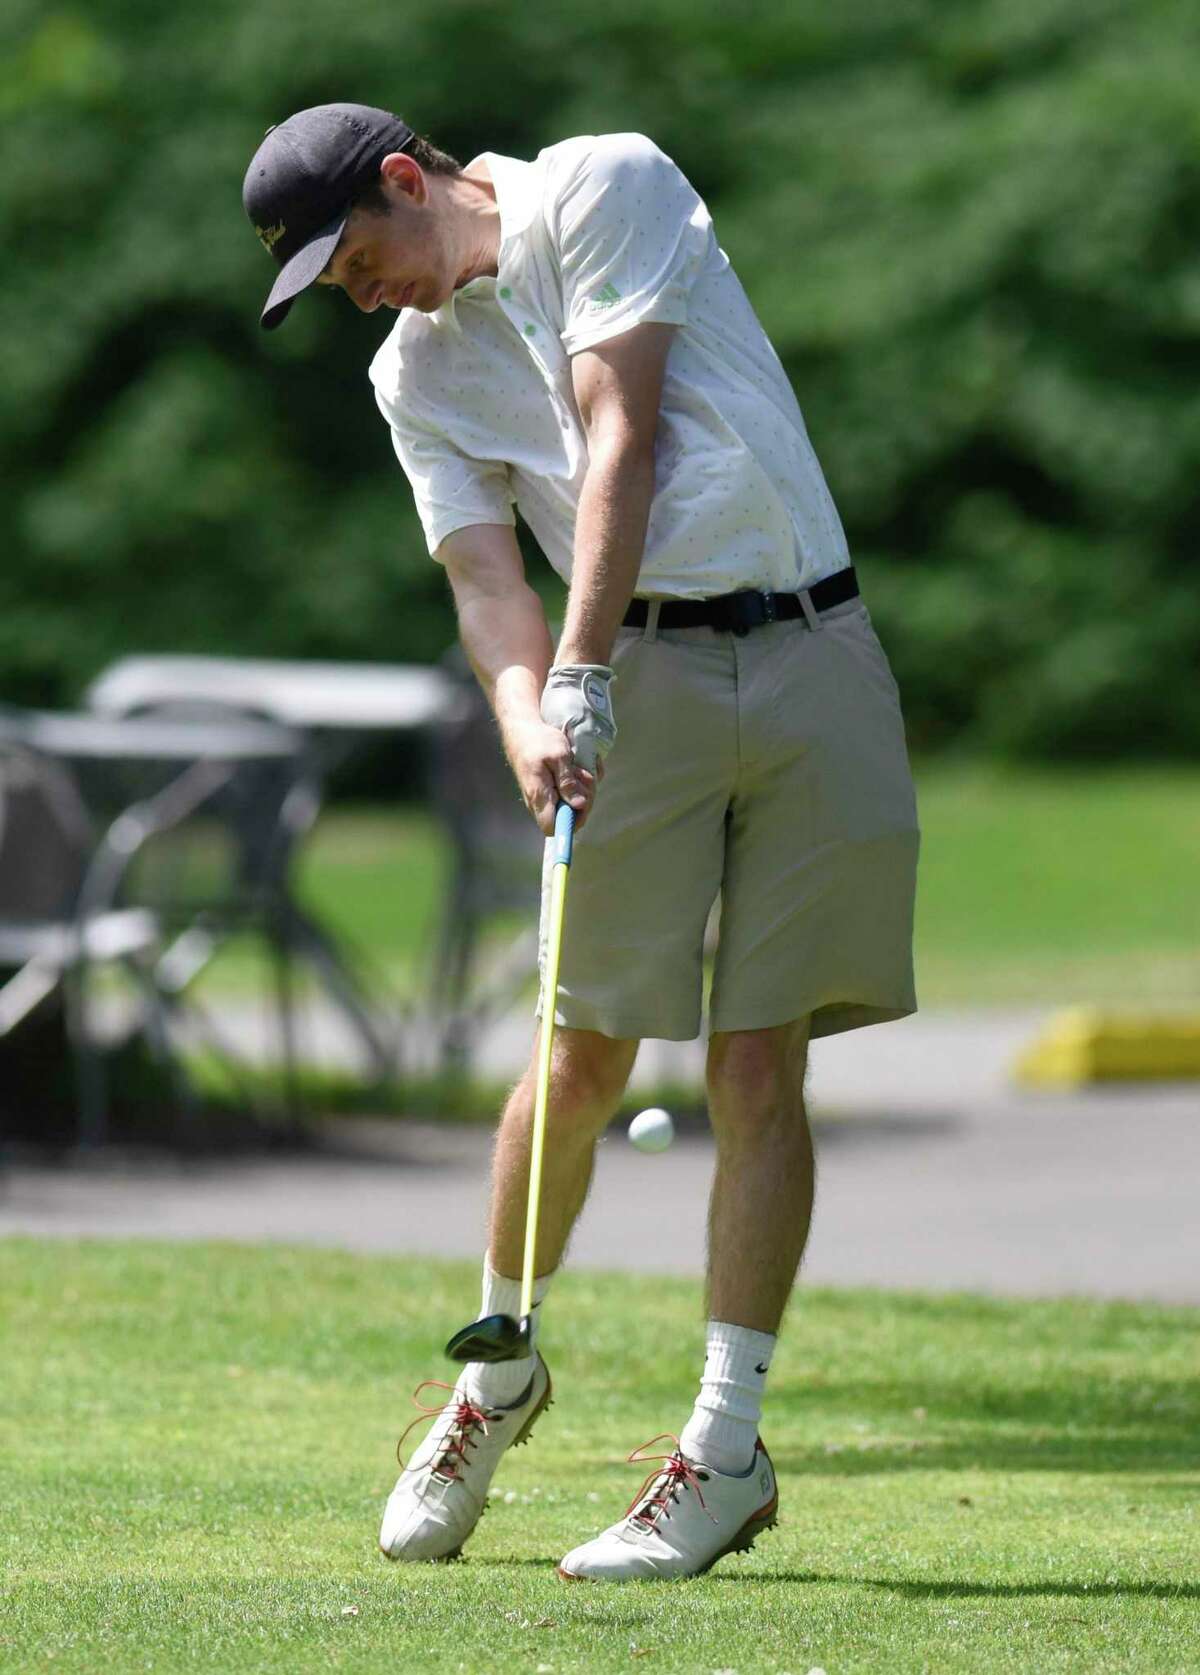 Michael Hickey tees off in the 76th Annual Town Wide Men's Golf Tournament at Griffith E. Harris Golf Course in Greenwich, Conn. Sunday, June 27, 2021.